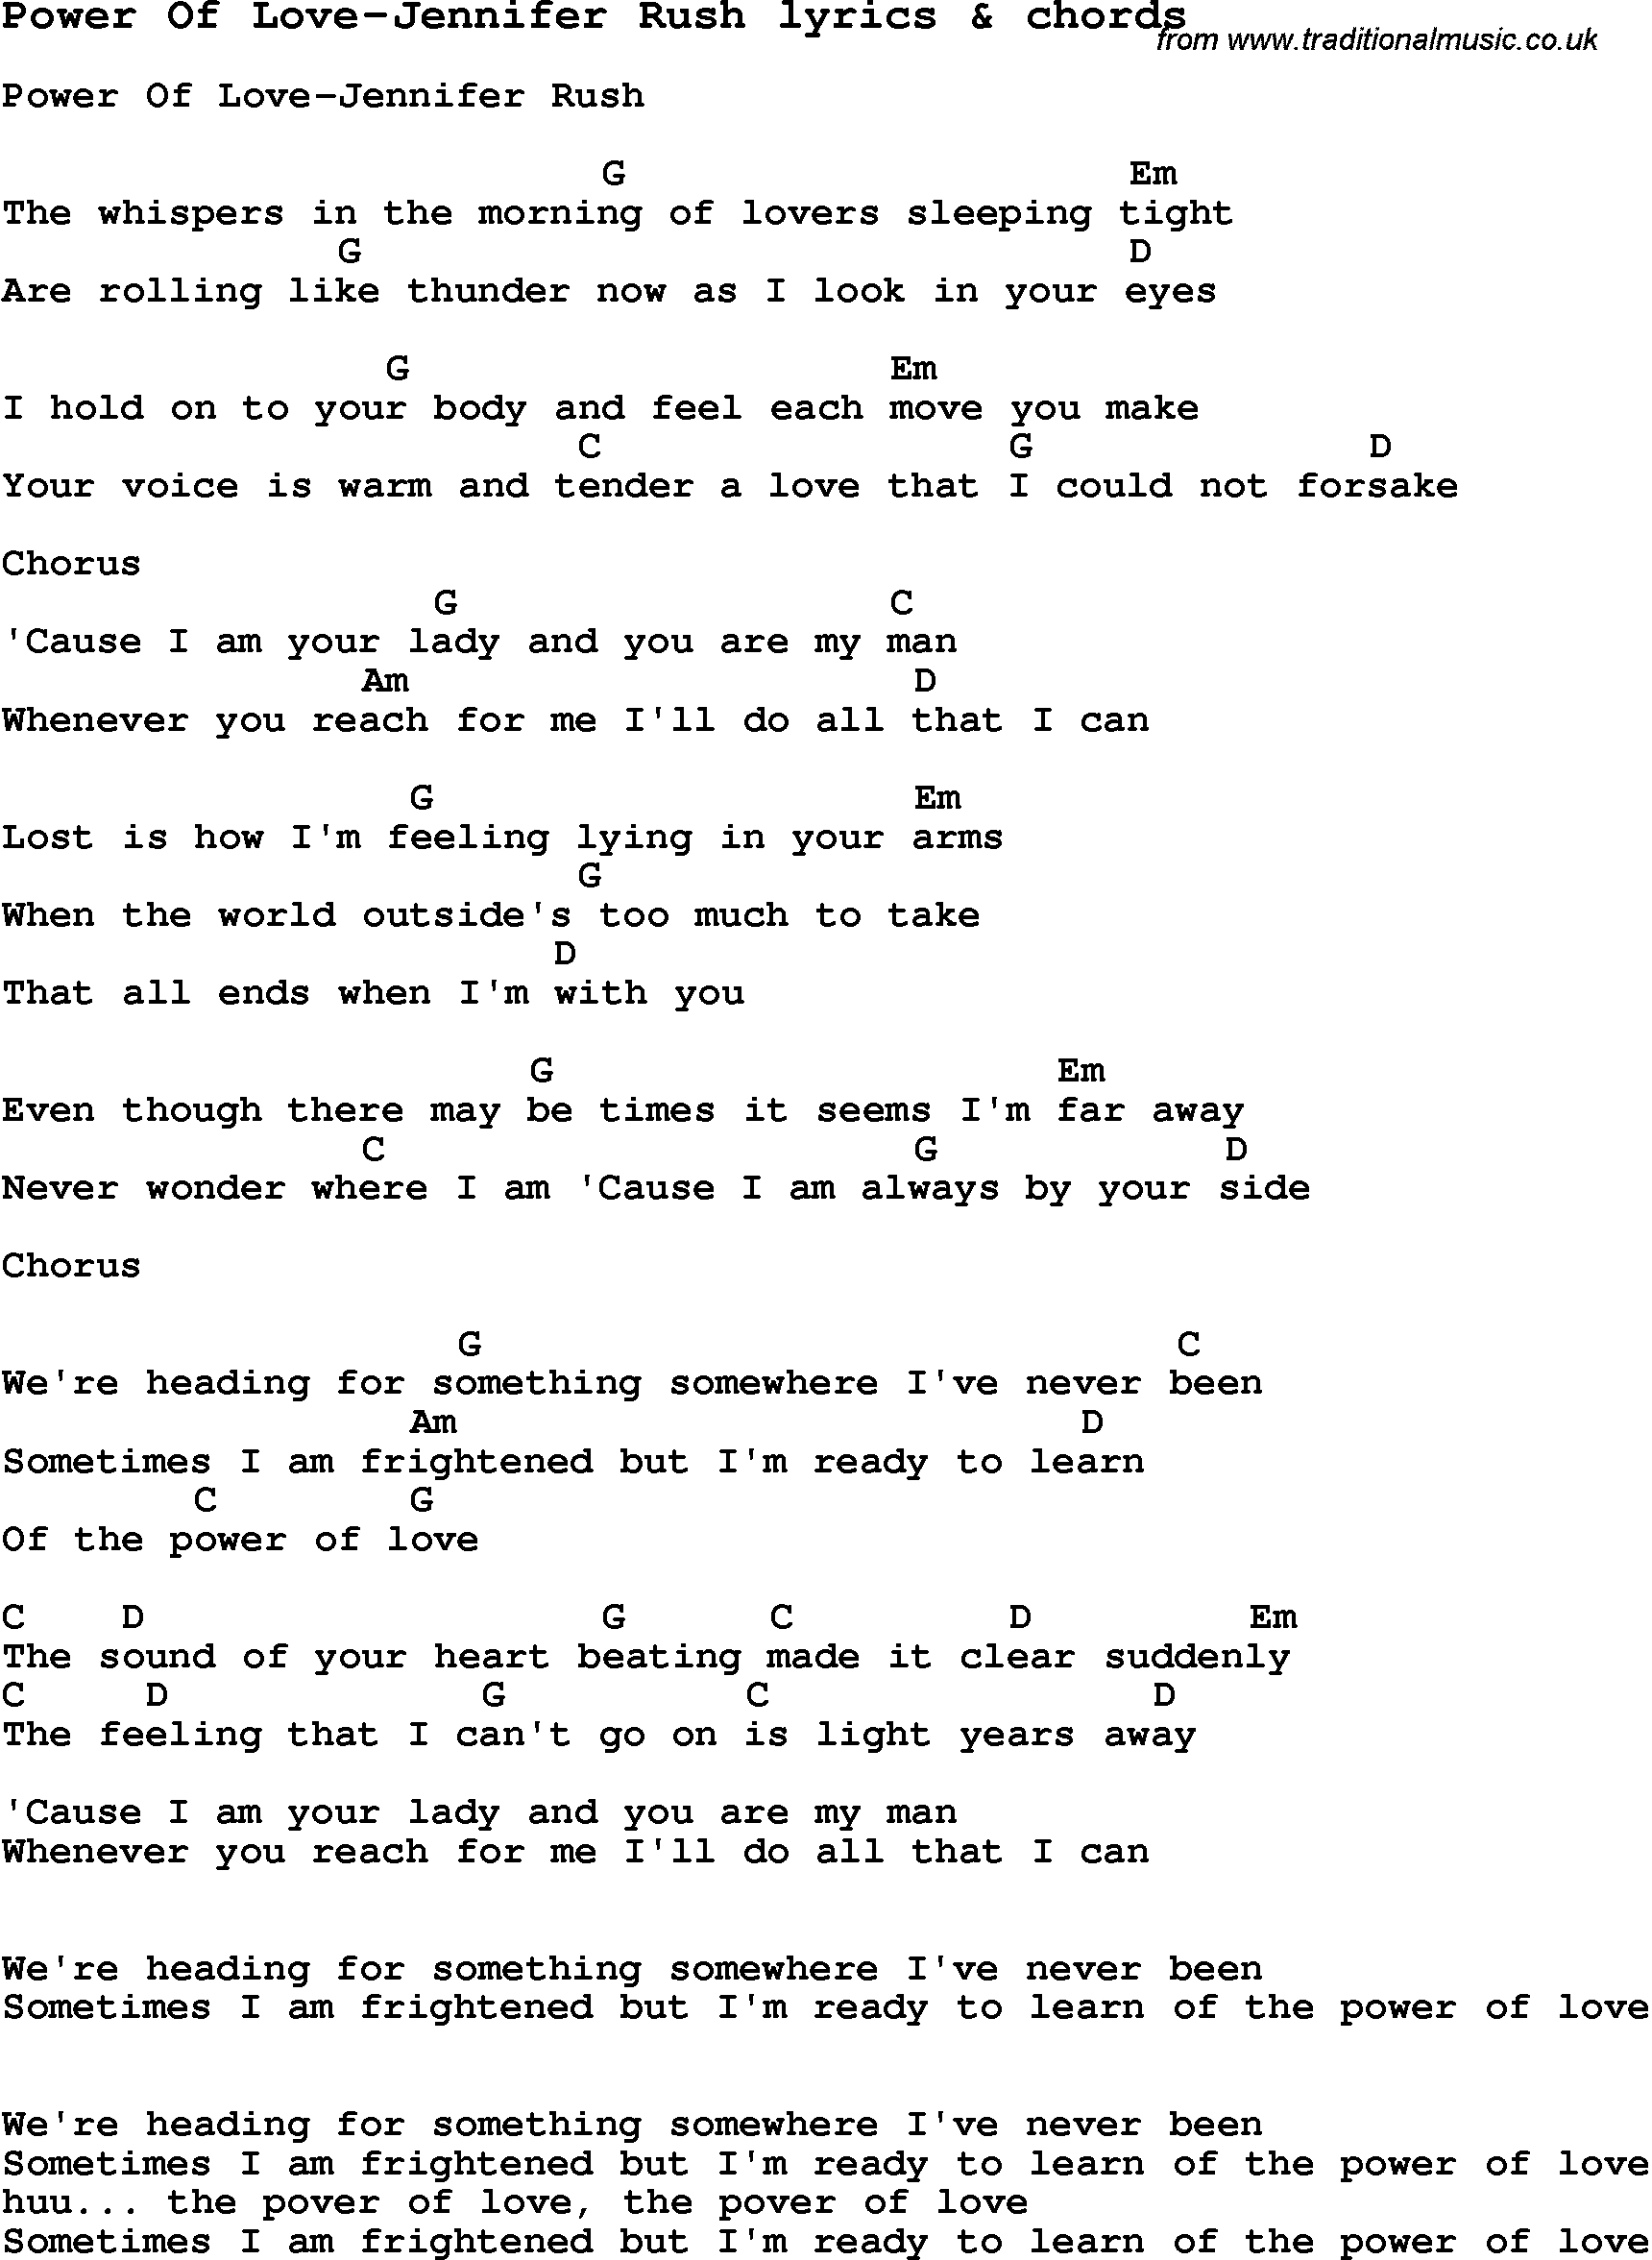 Make You Feel My Love Chords Love Song Lyrics Forpower Of Love Jennifer Rush With Chords